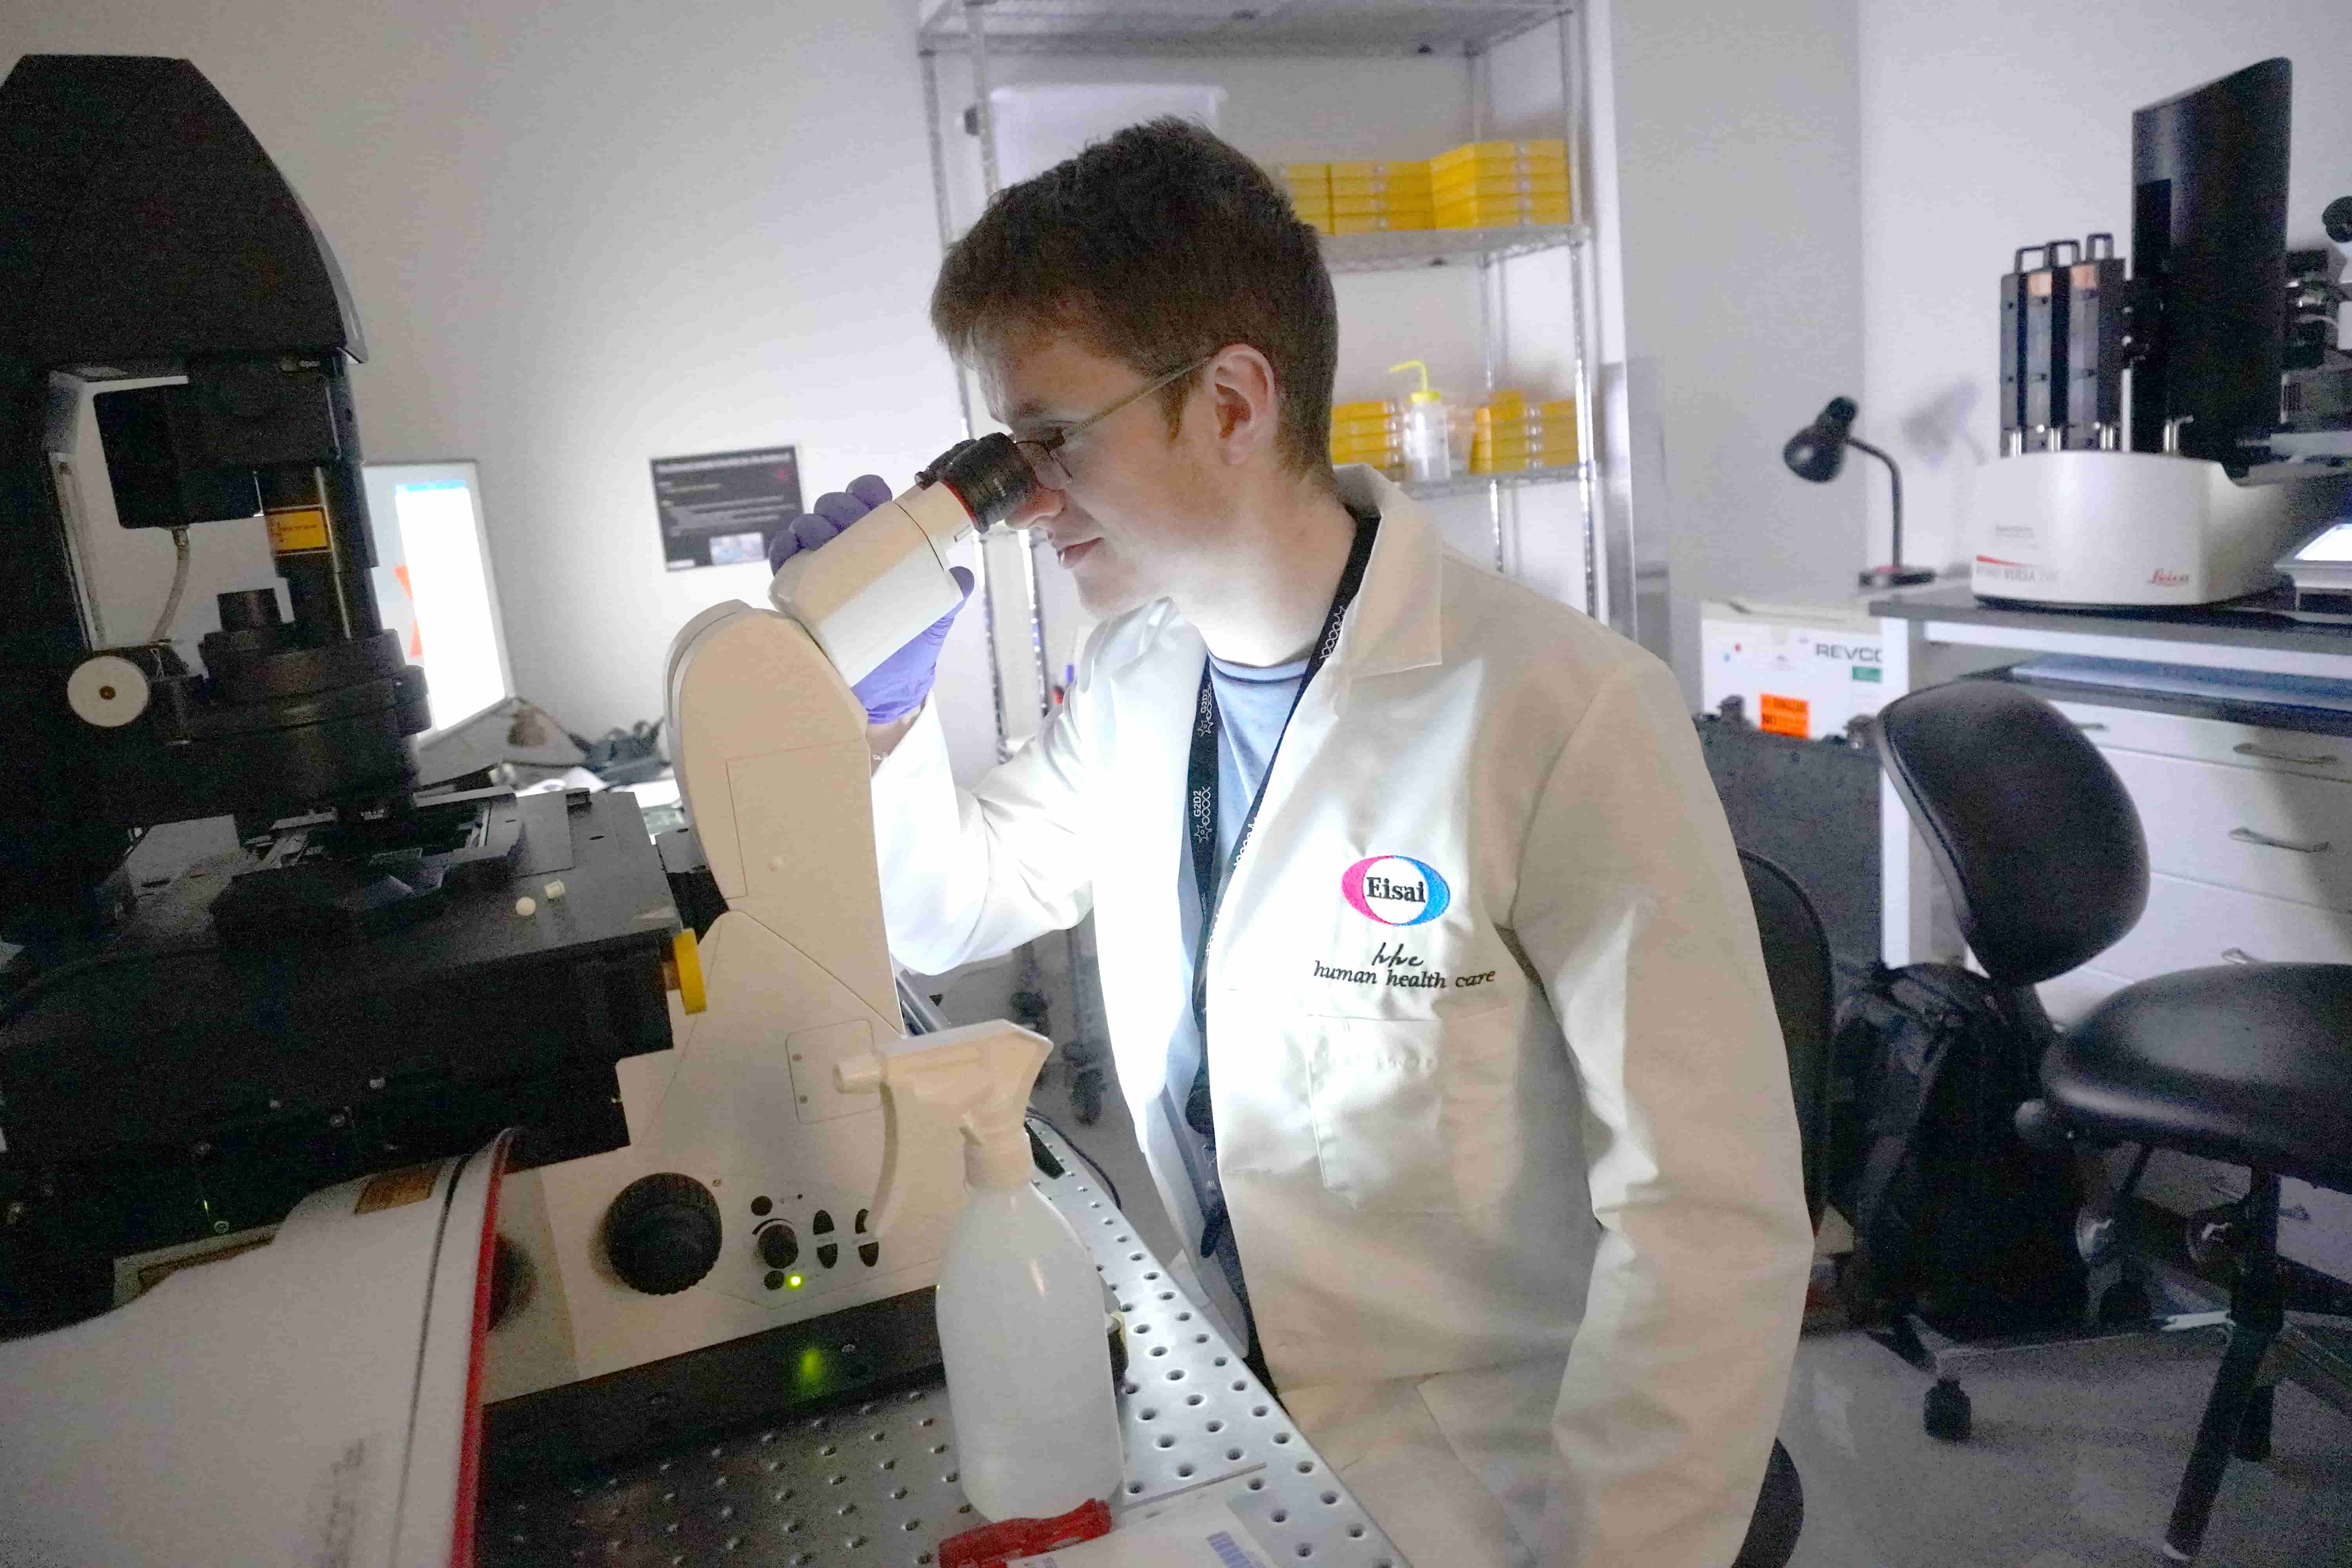 A male scientist wearing an Eisai lab coat looking into a microscope in a lab